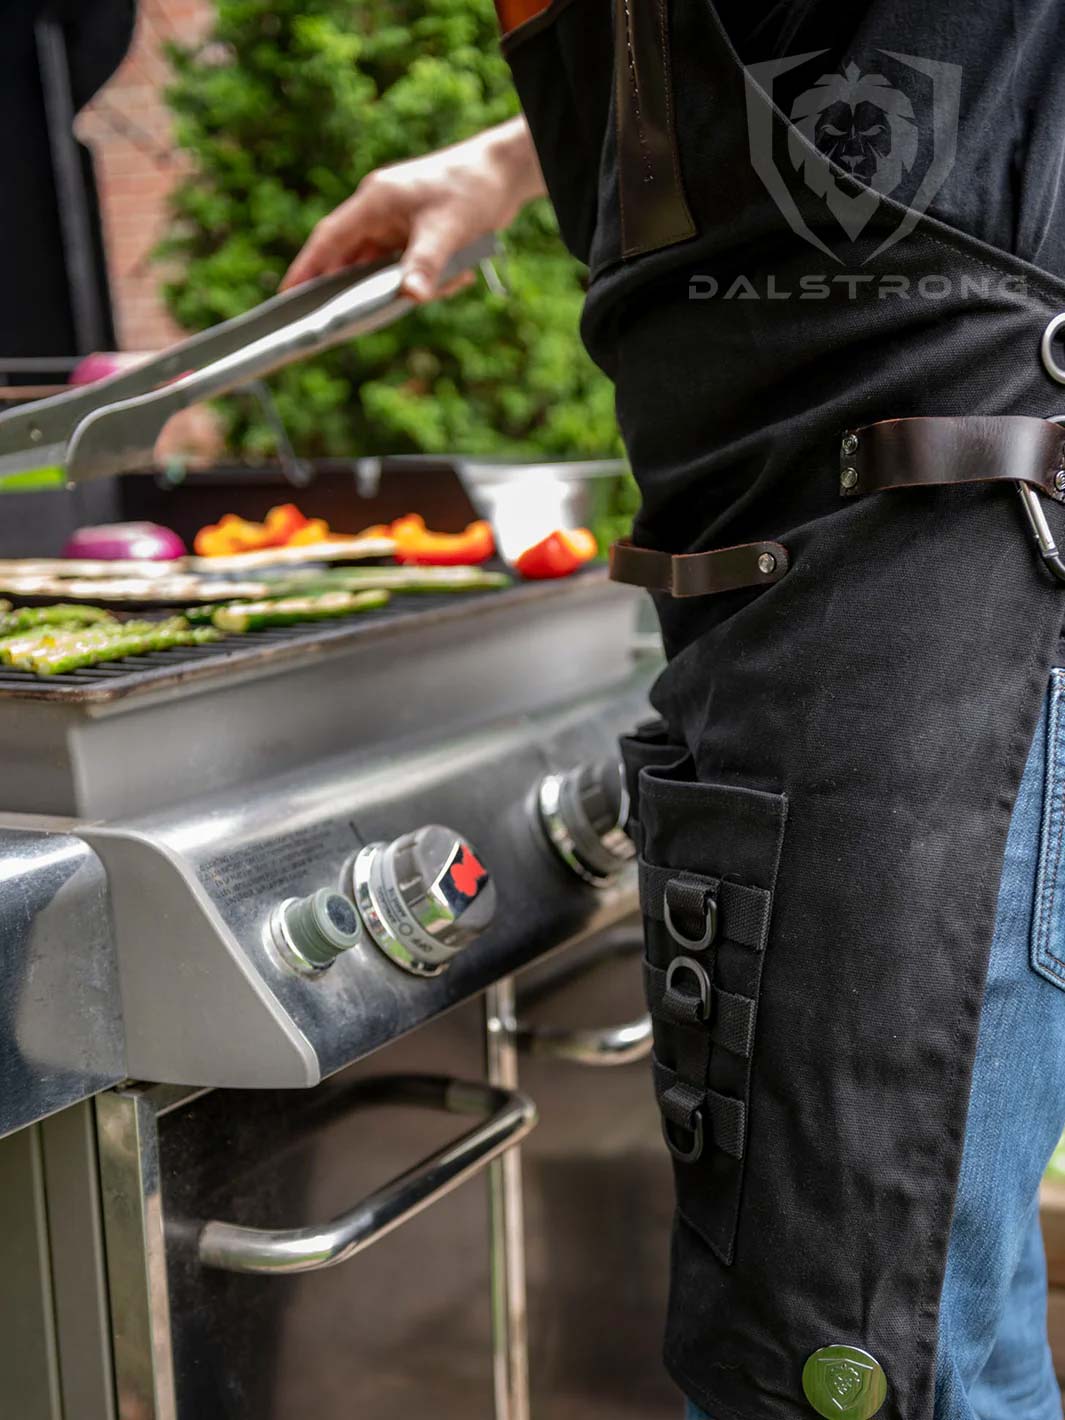 Dalstrong heavy-duty waxed canvas bbq apron beside a griller.